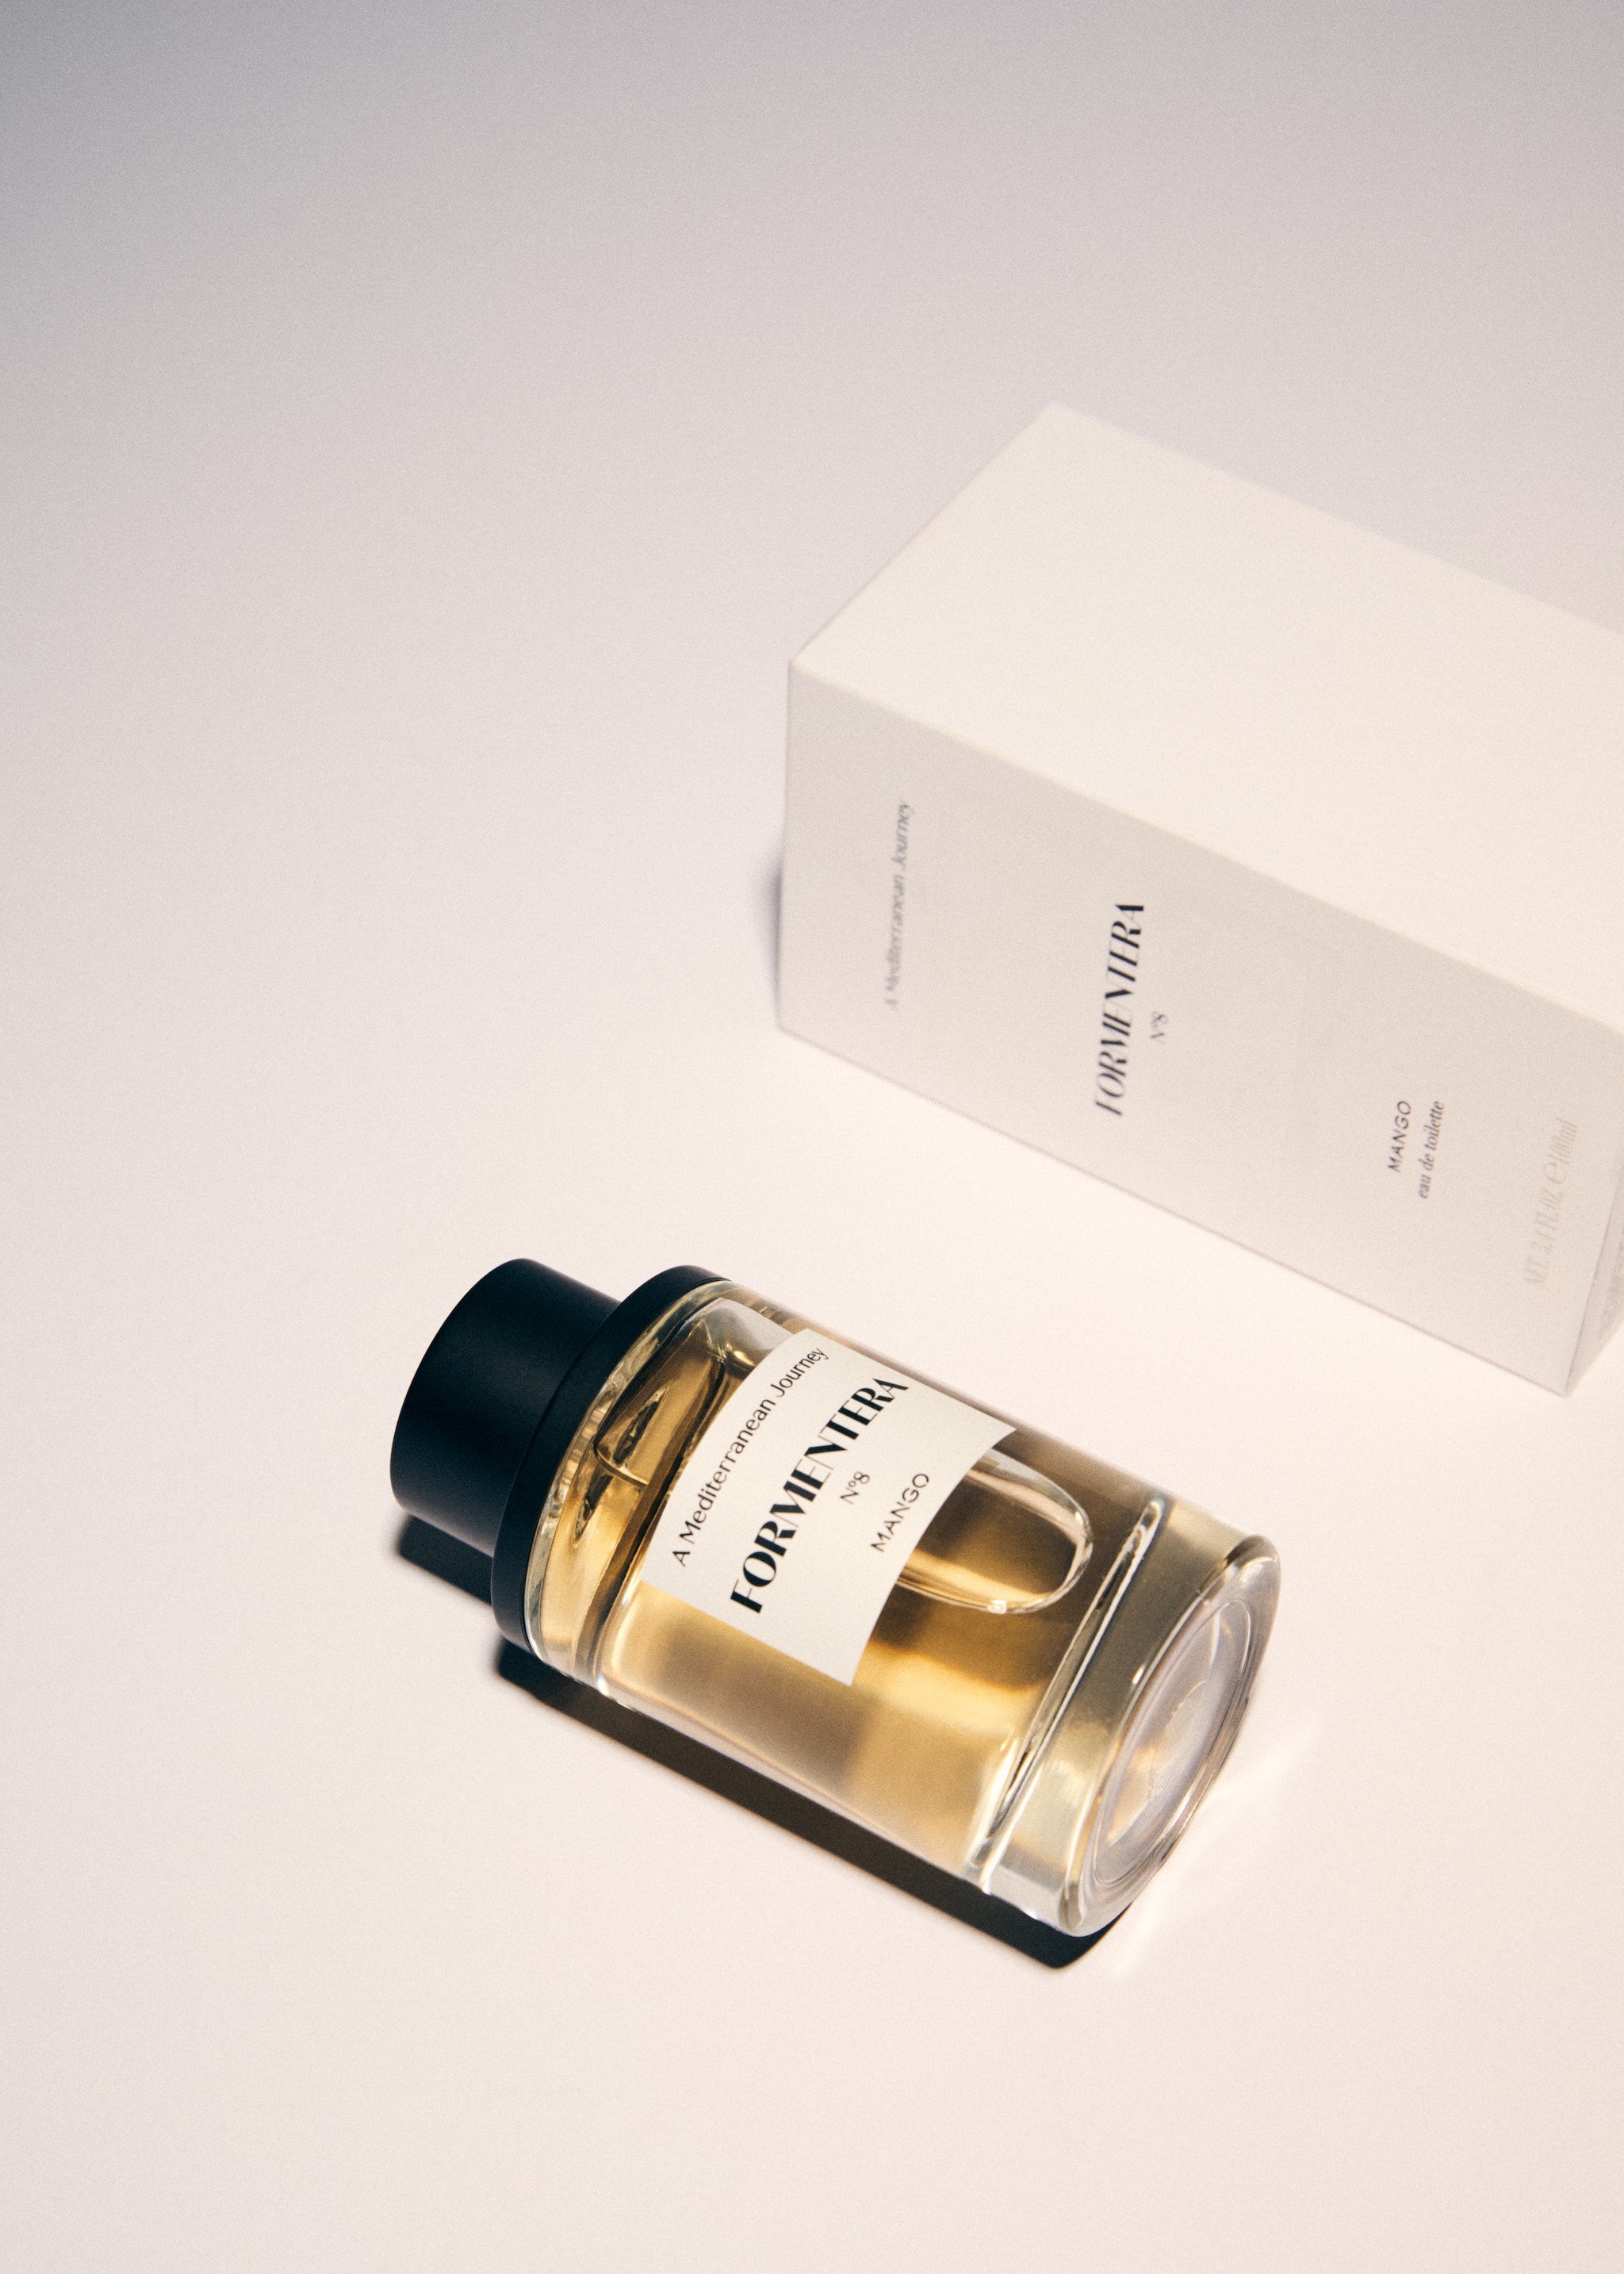 Fragrance Formentera 100 ml - Details of the article 9